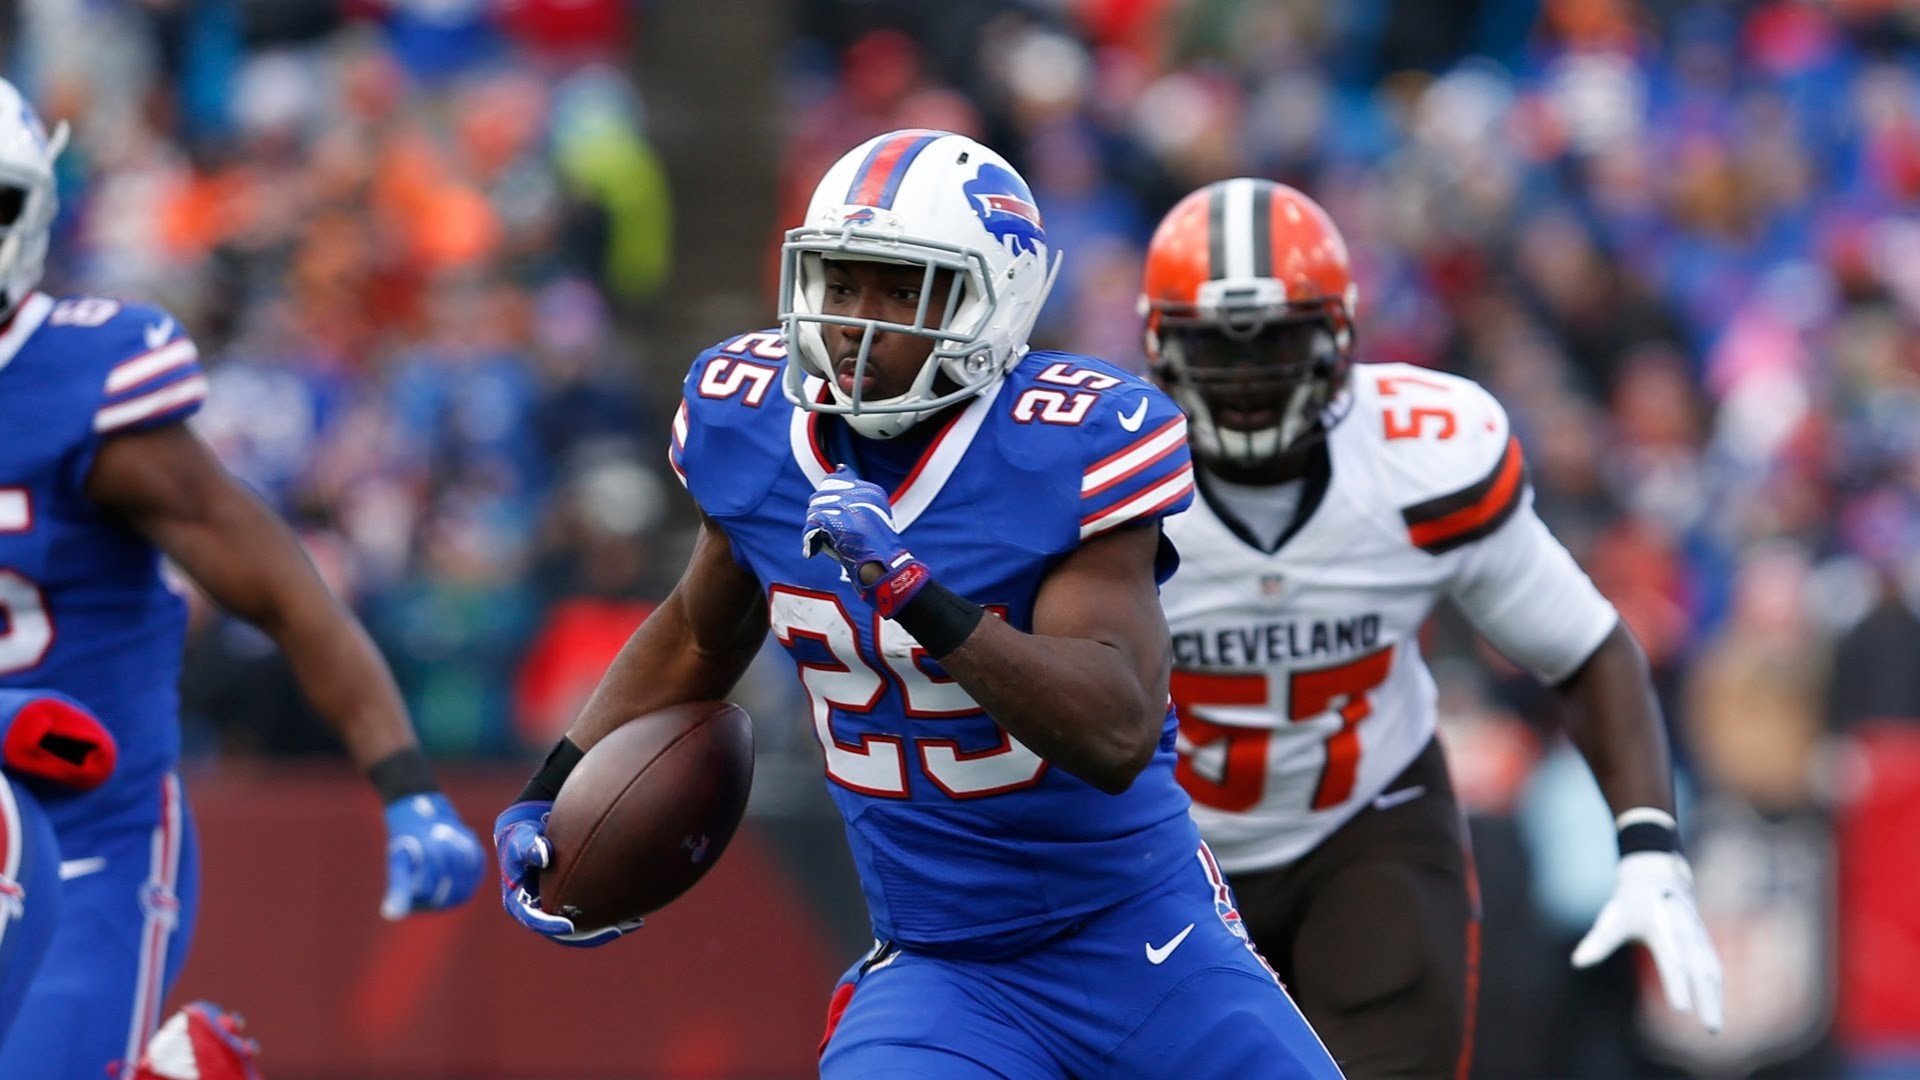 LeSean McCoy Runs Wild LeSean Mccoy is third in the AFC in rushing yards, but is averaging nearly